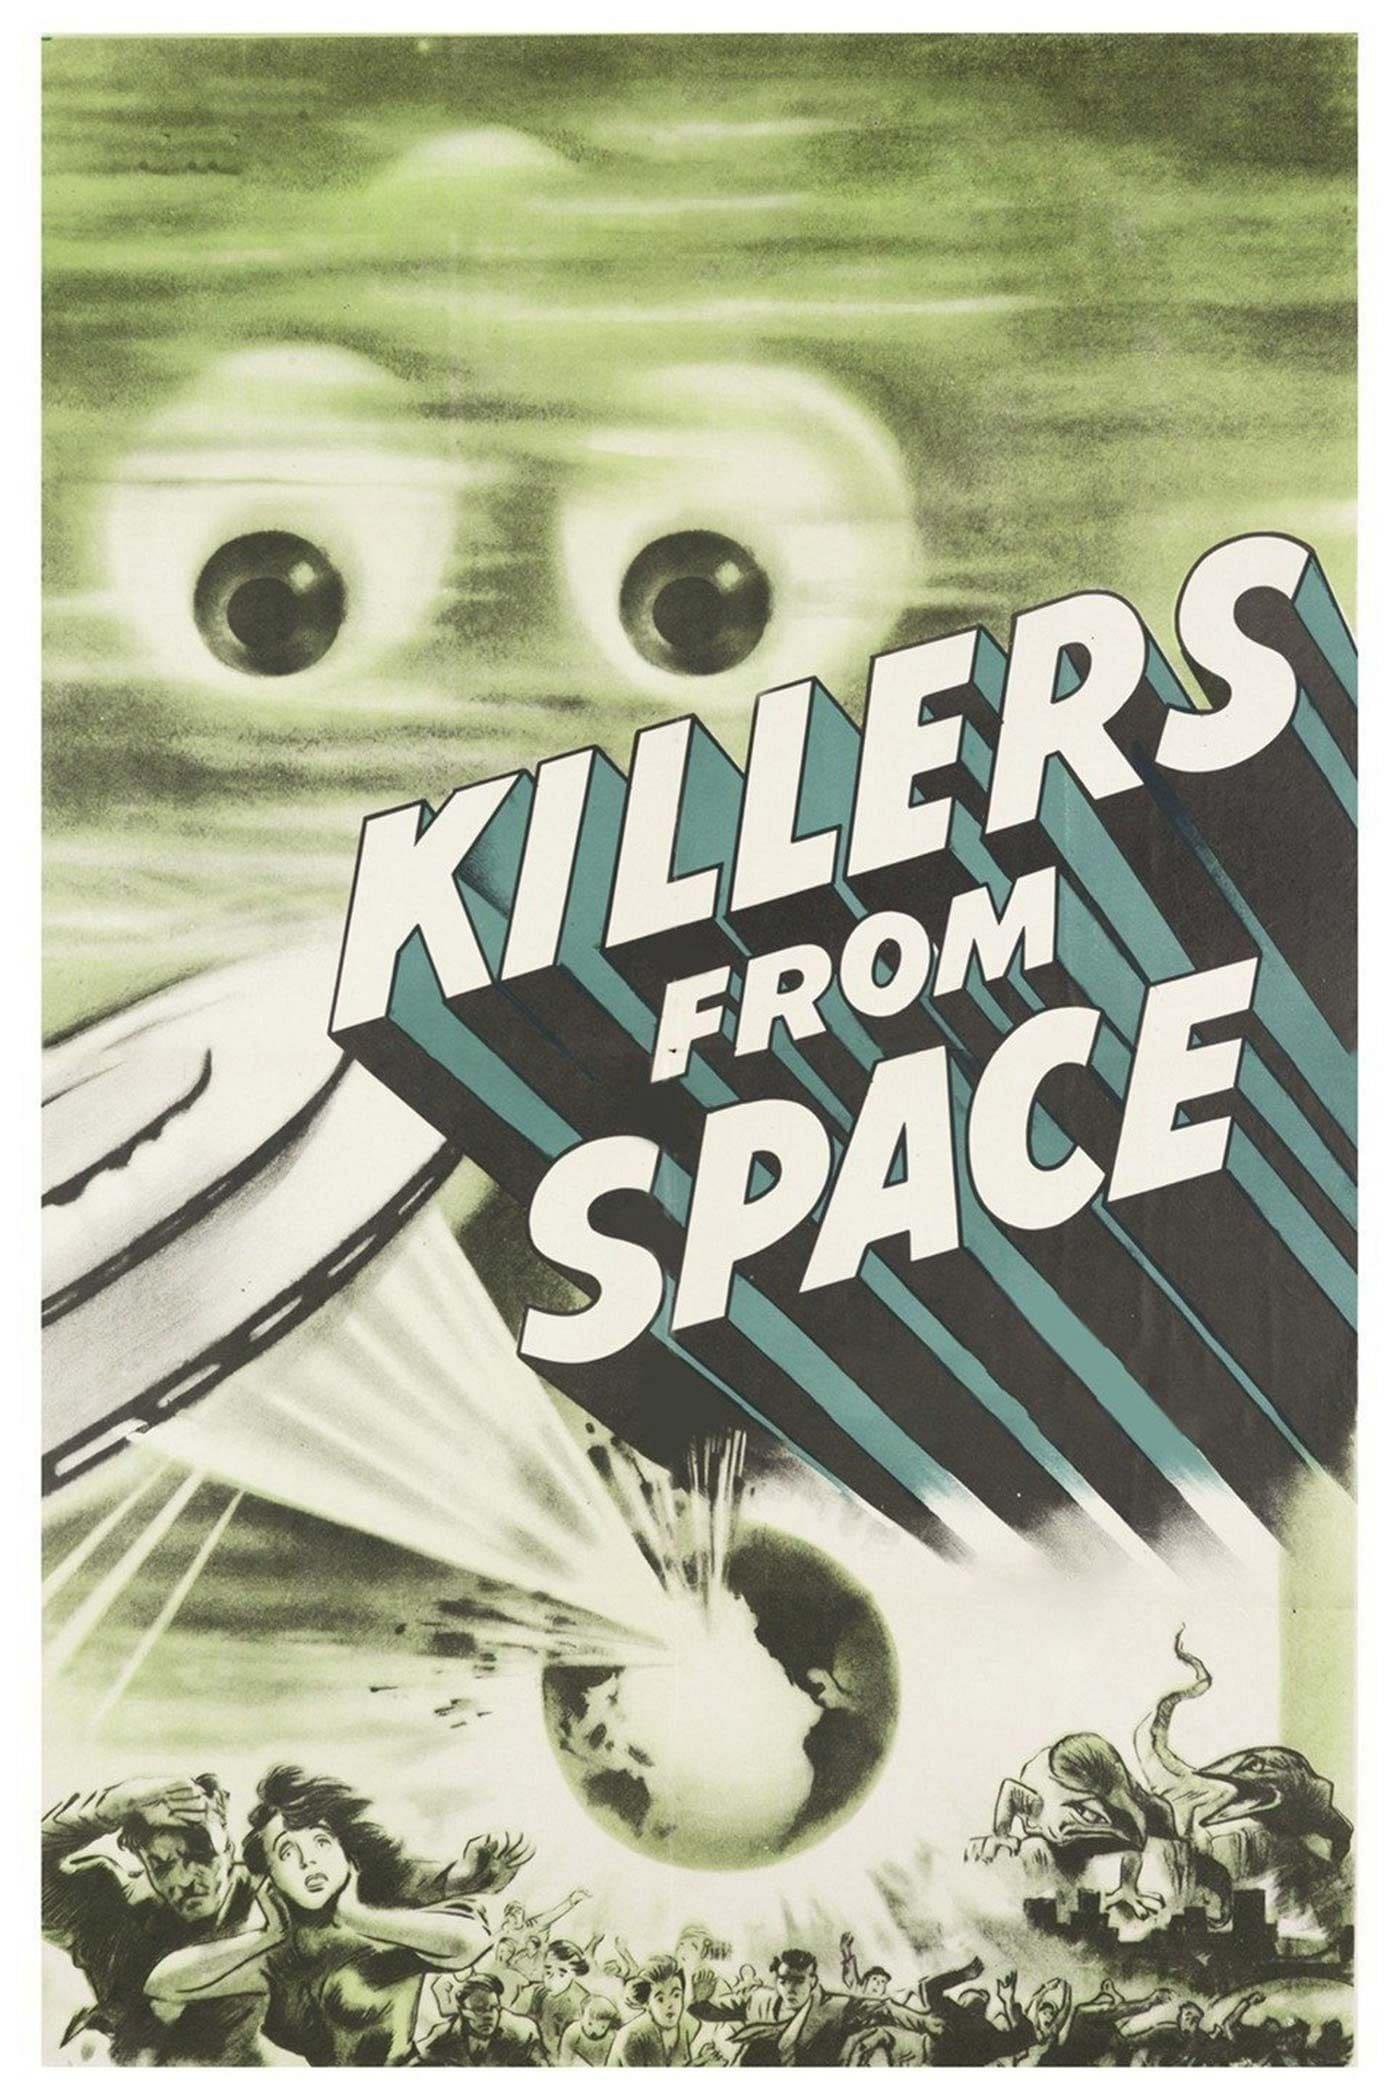 Killers from Space poster